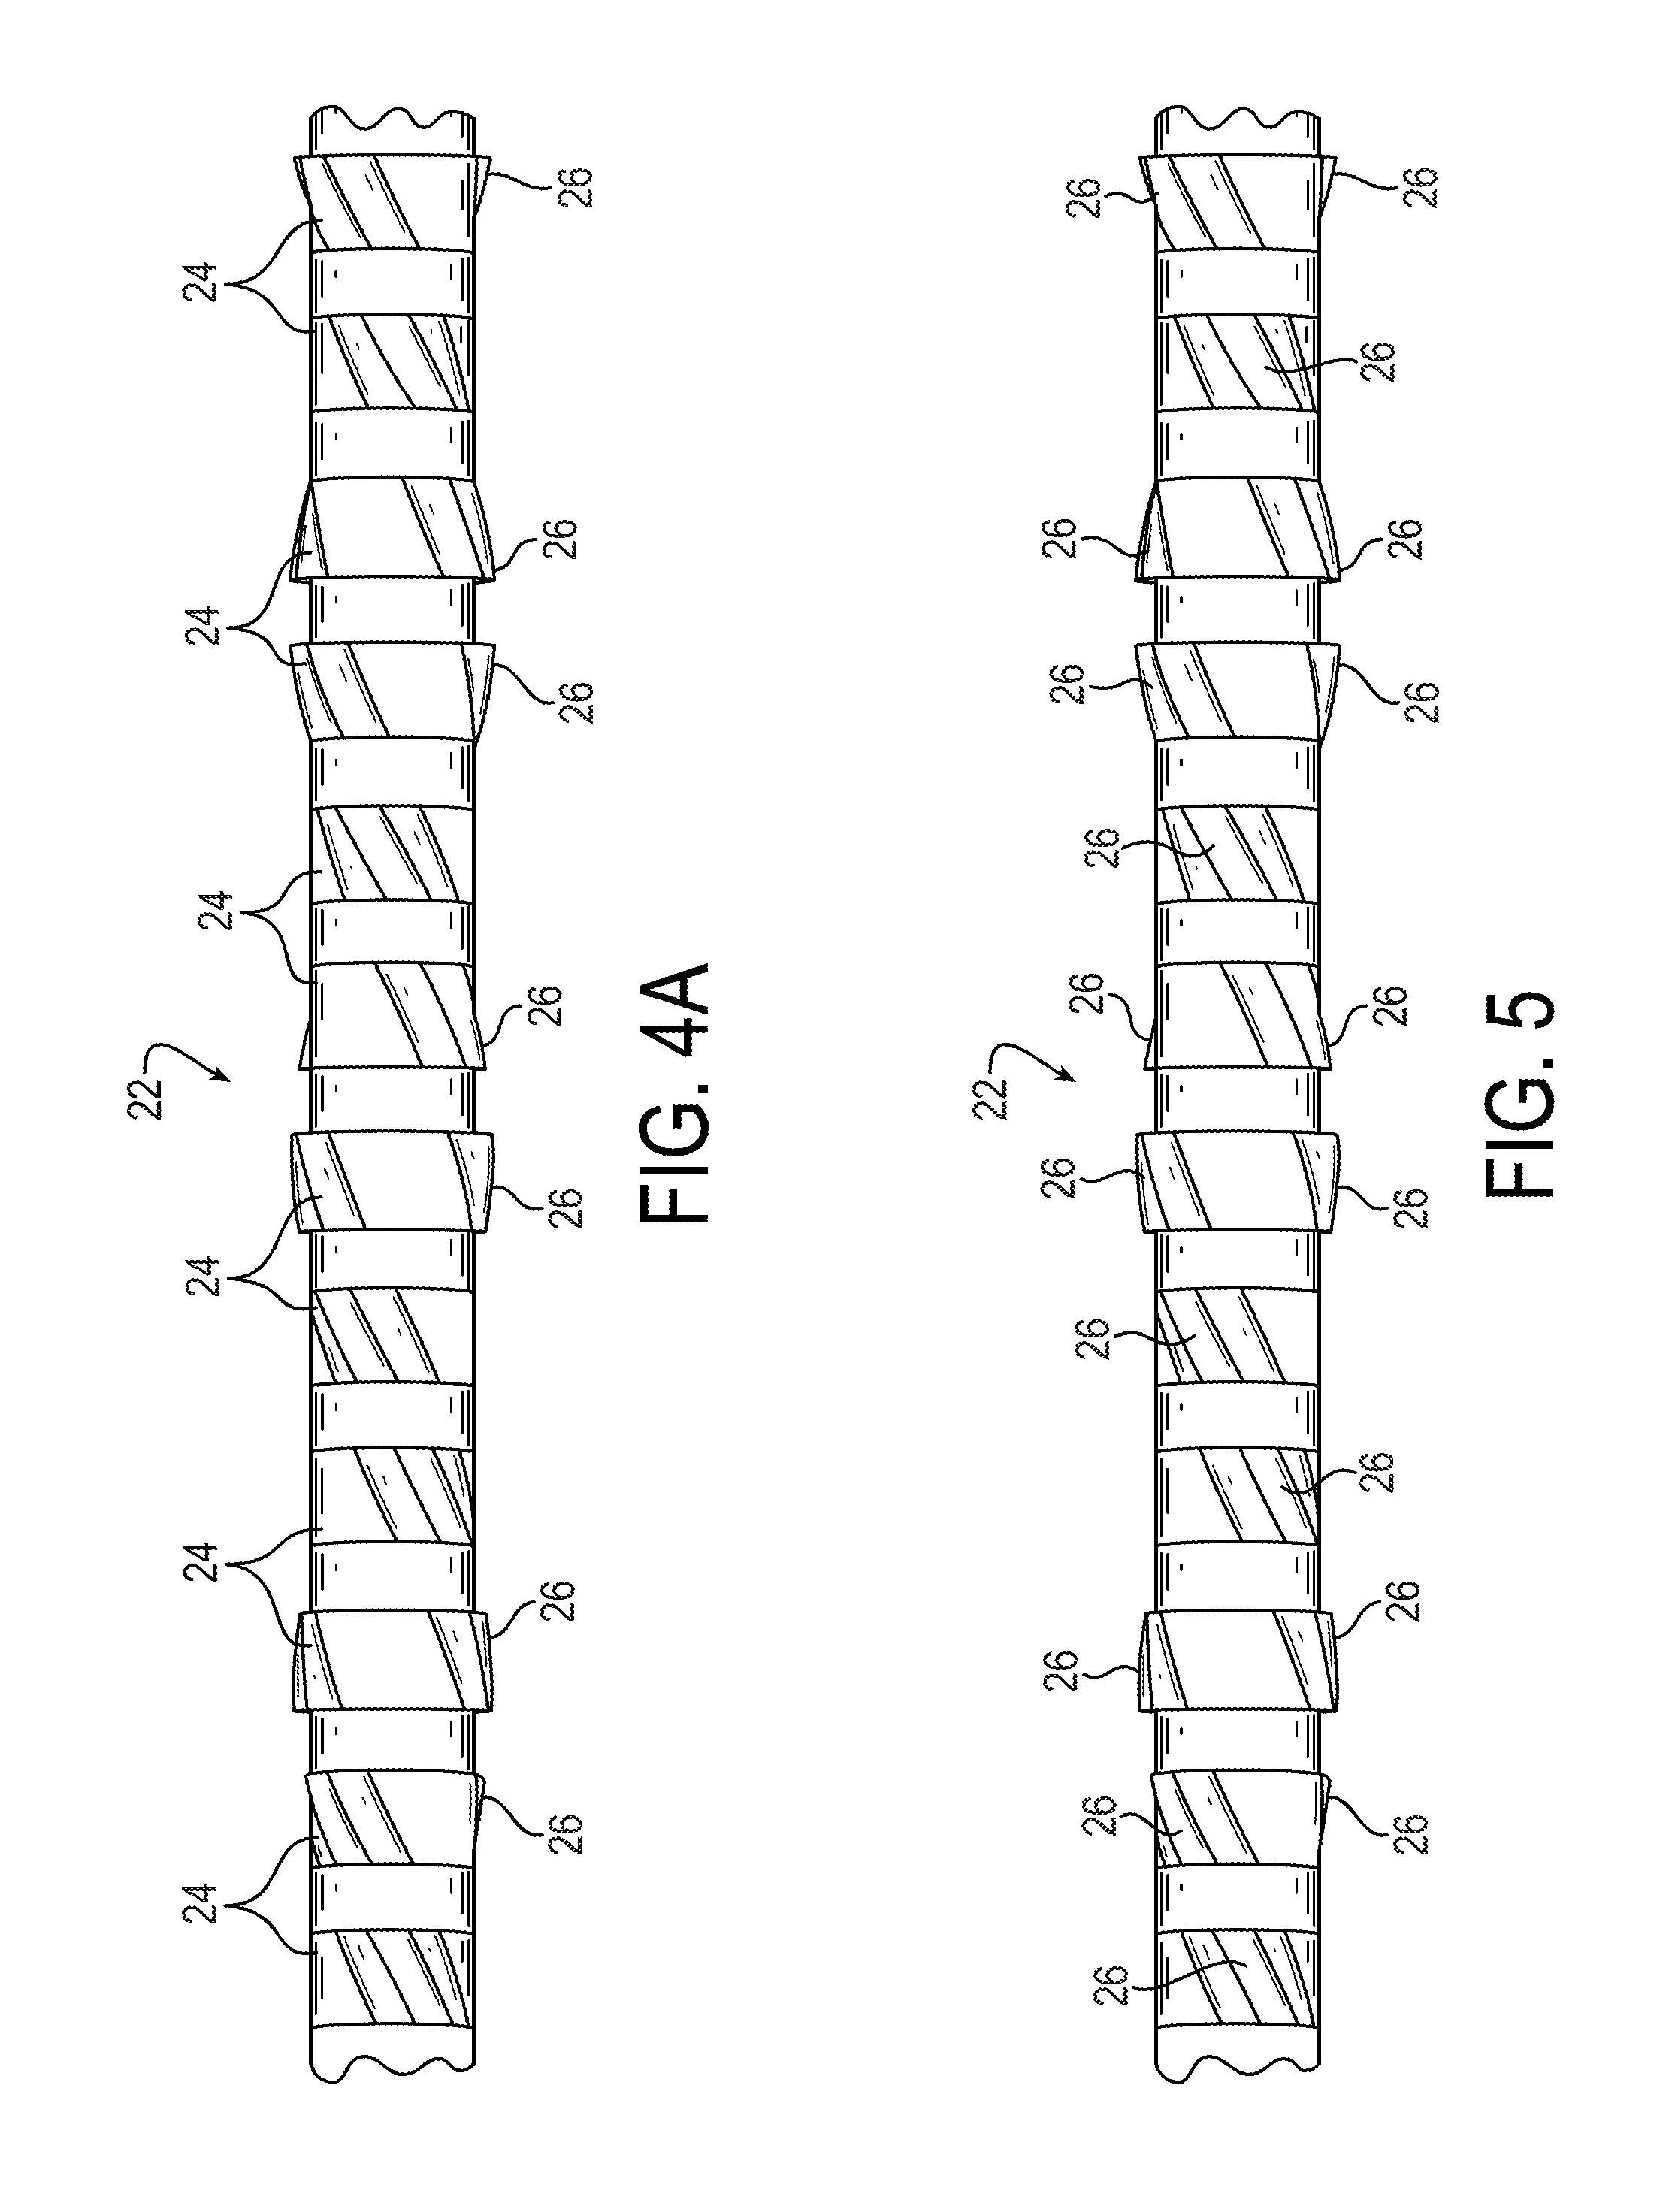 Apparatus and method for cleaning the barrel of a firearm